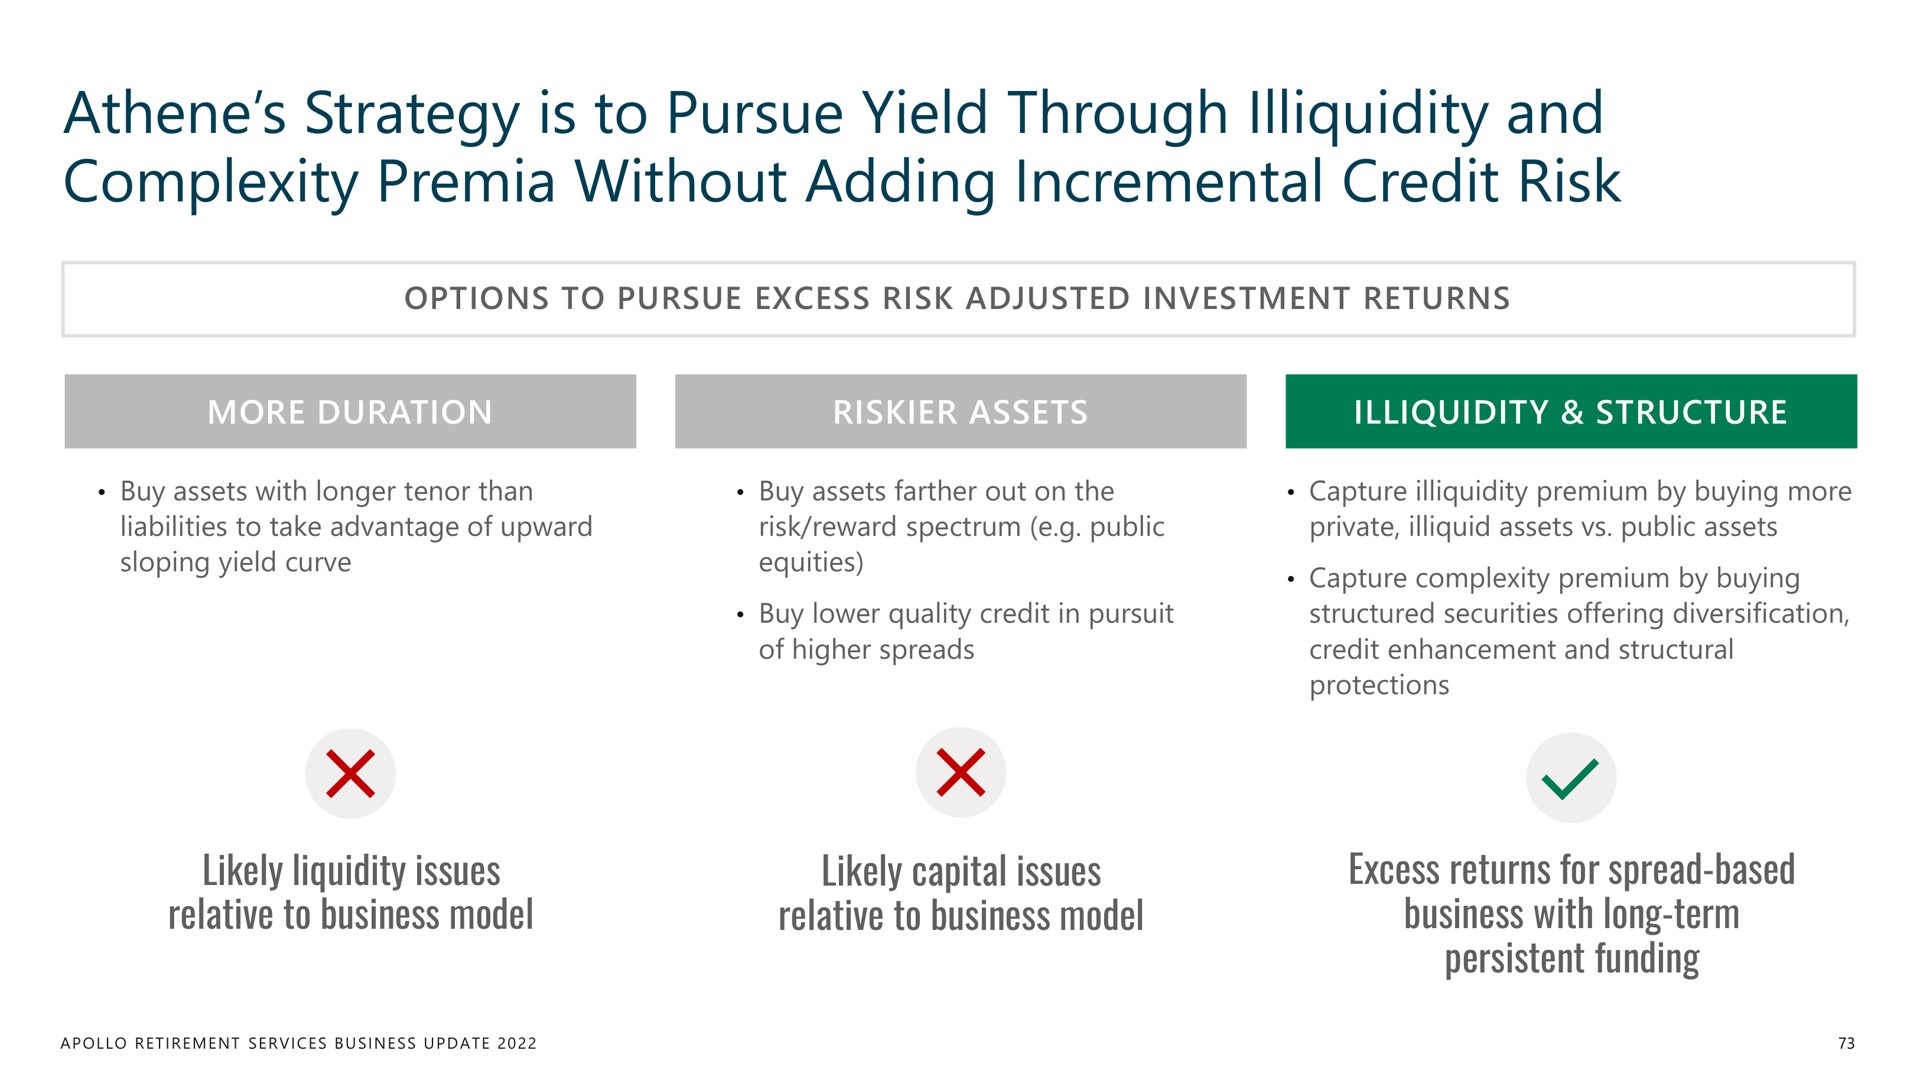 strategy is to pursue yield through illiquidity and complexity without adding incremental credit risk | Apollo Global Management